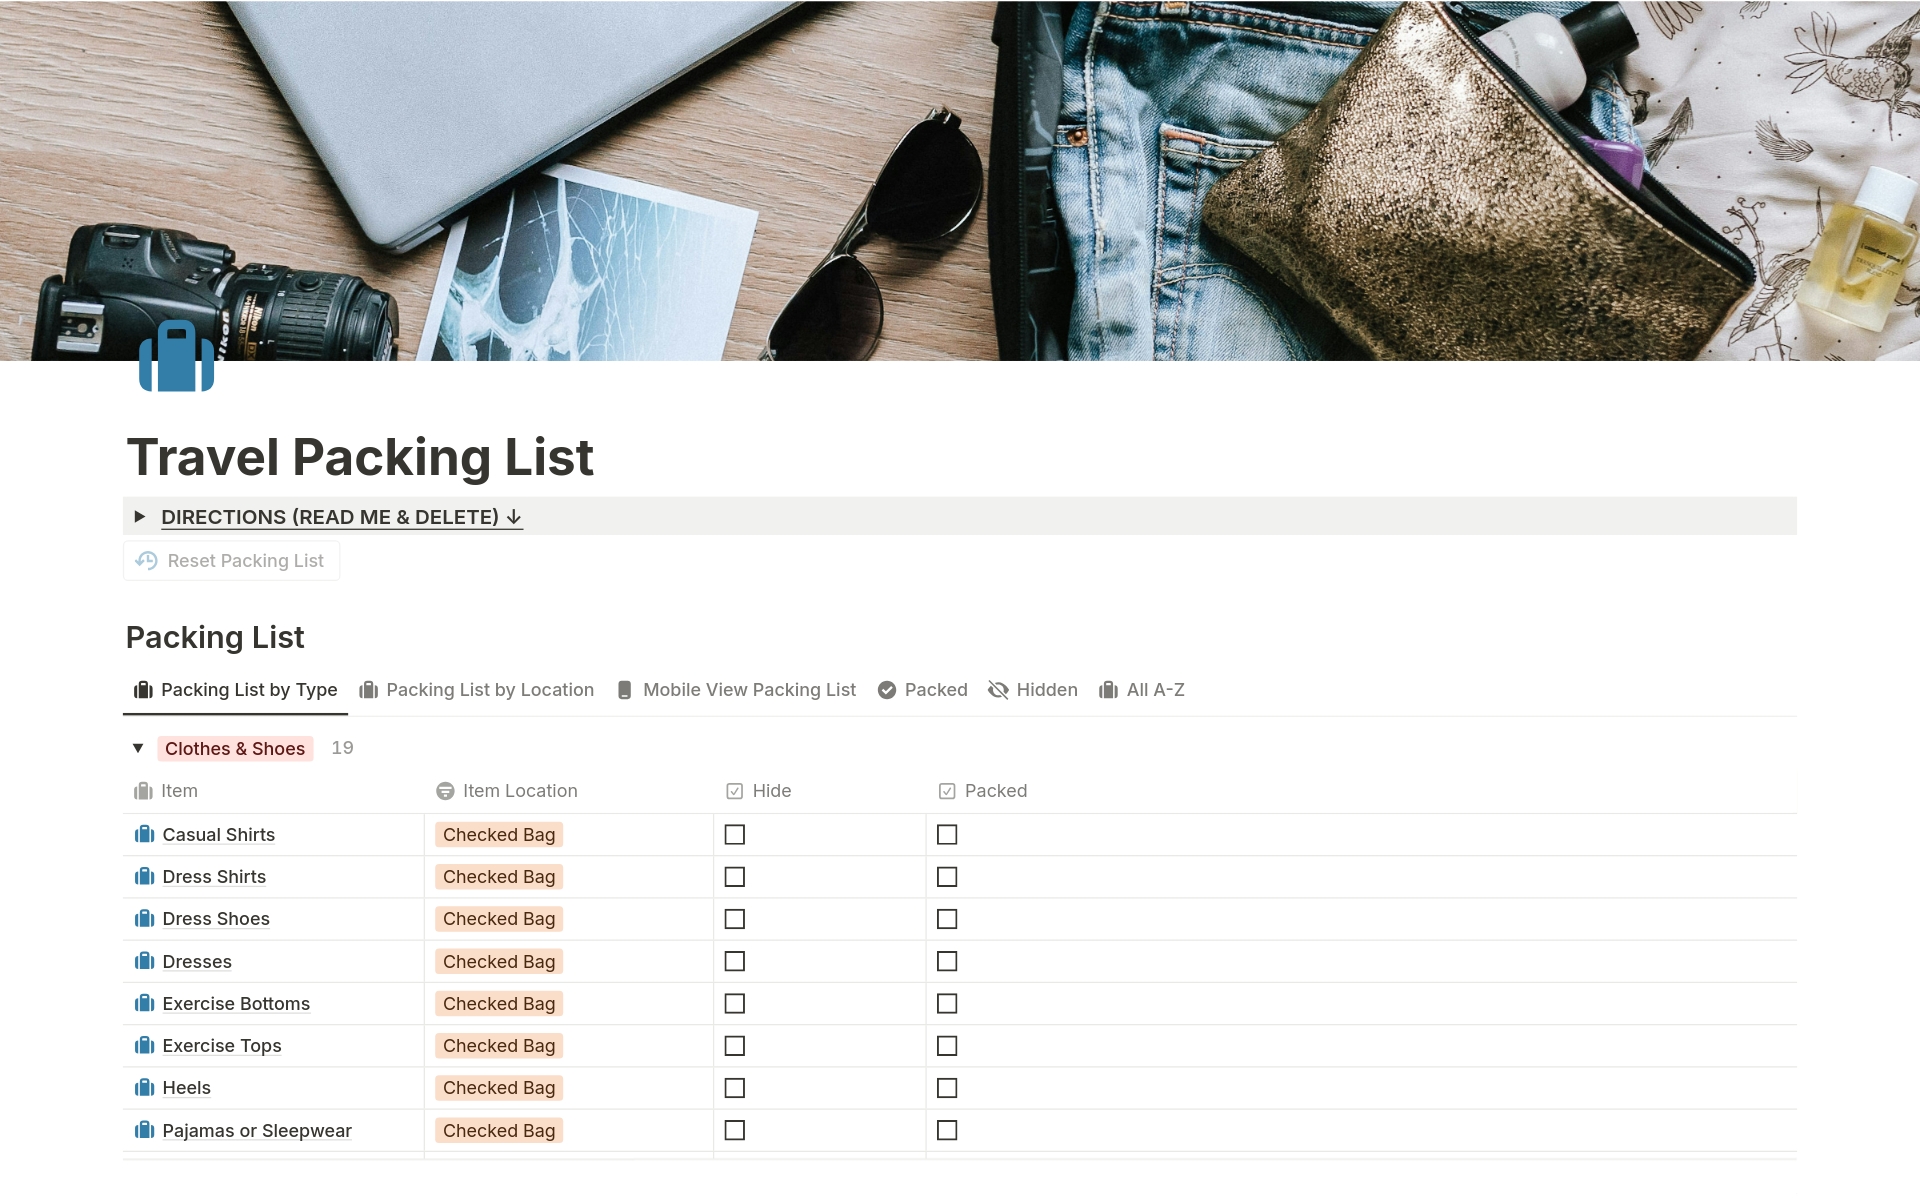 Fully customizable packing list for travel. Easy to use for beginners, this template will help you stay organized when travel planning. A pre-filled checklist of over 100 travel items, this template can be reused again and again.